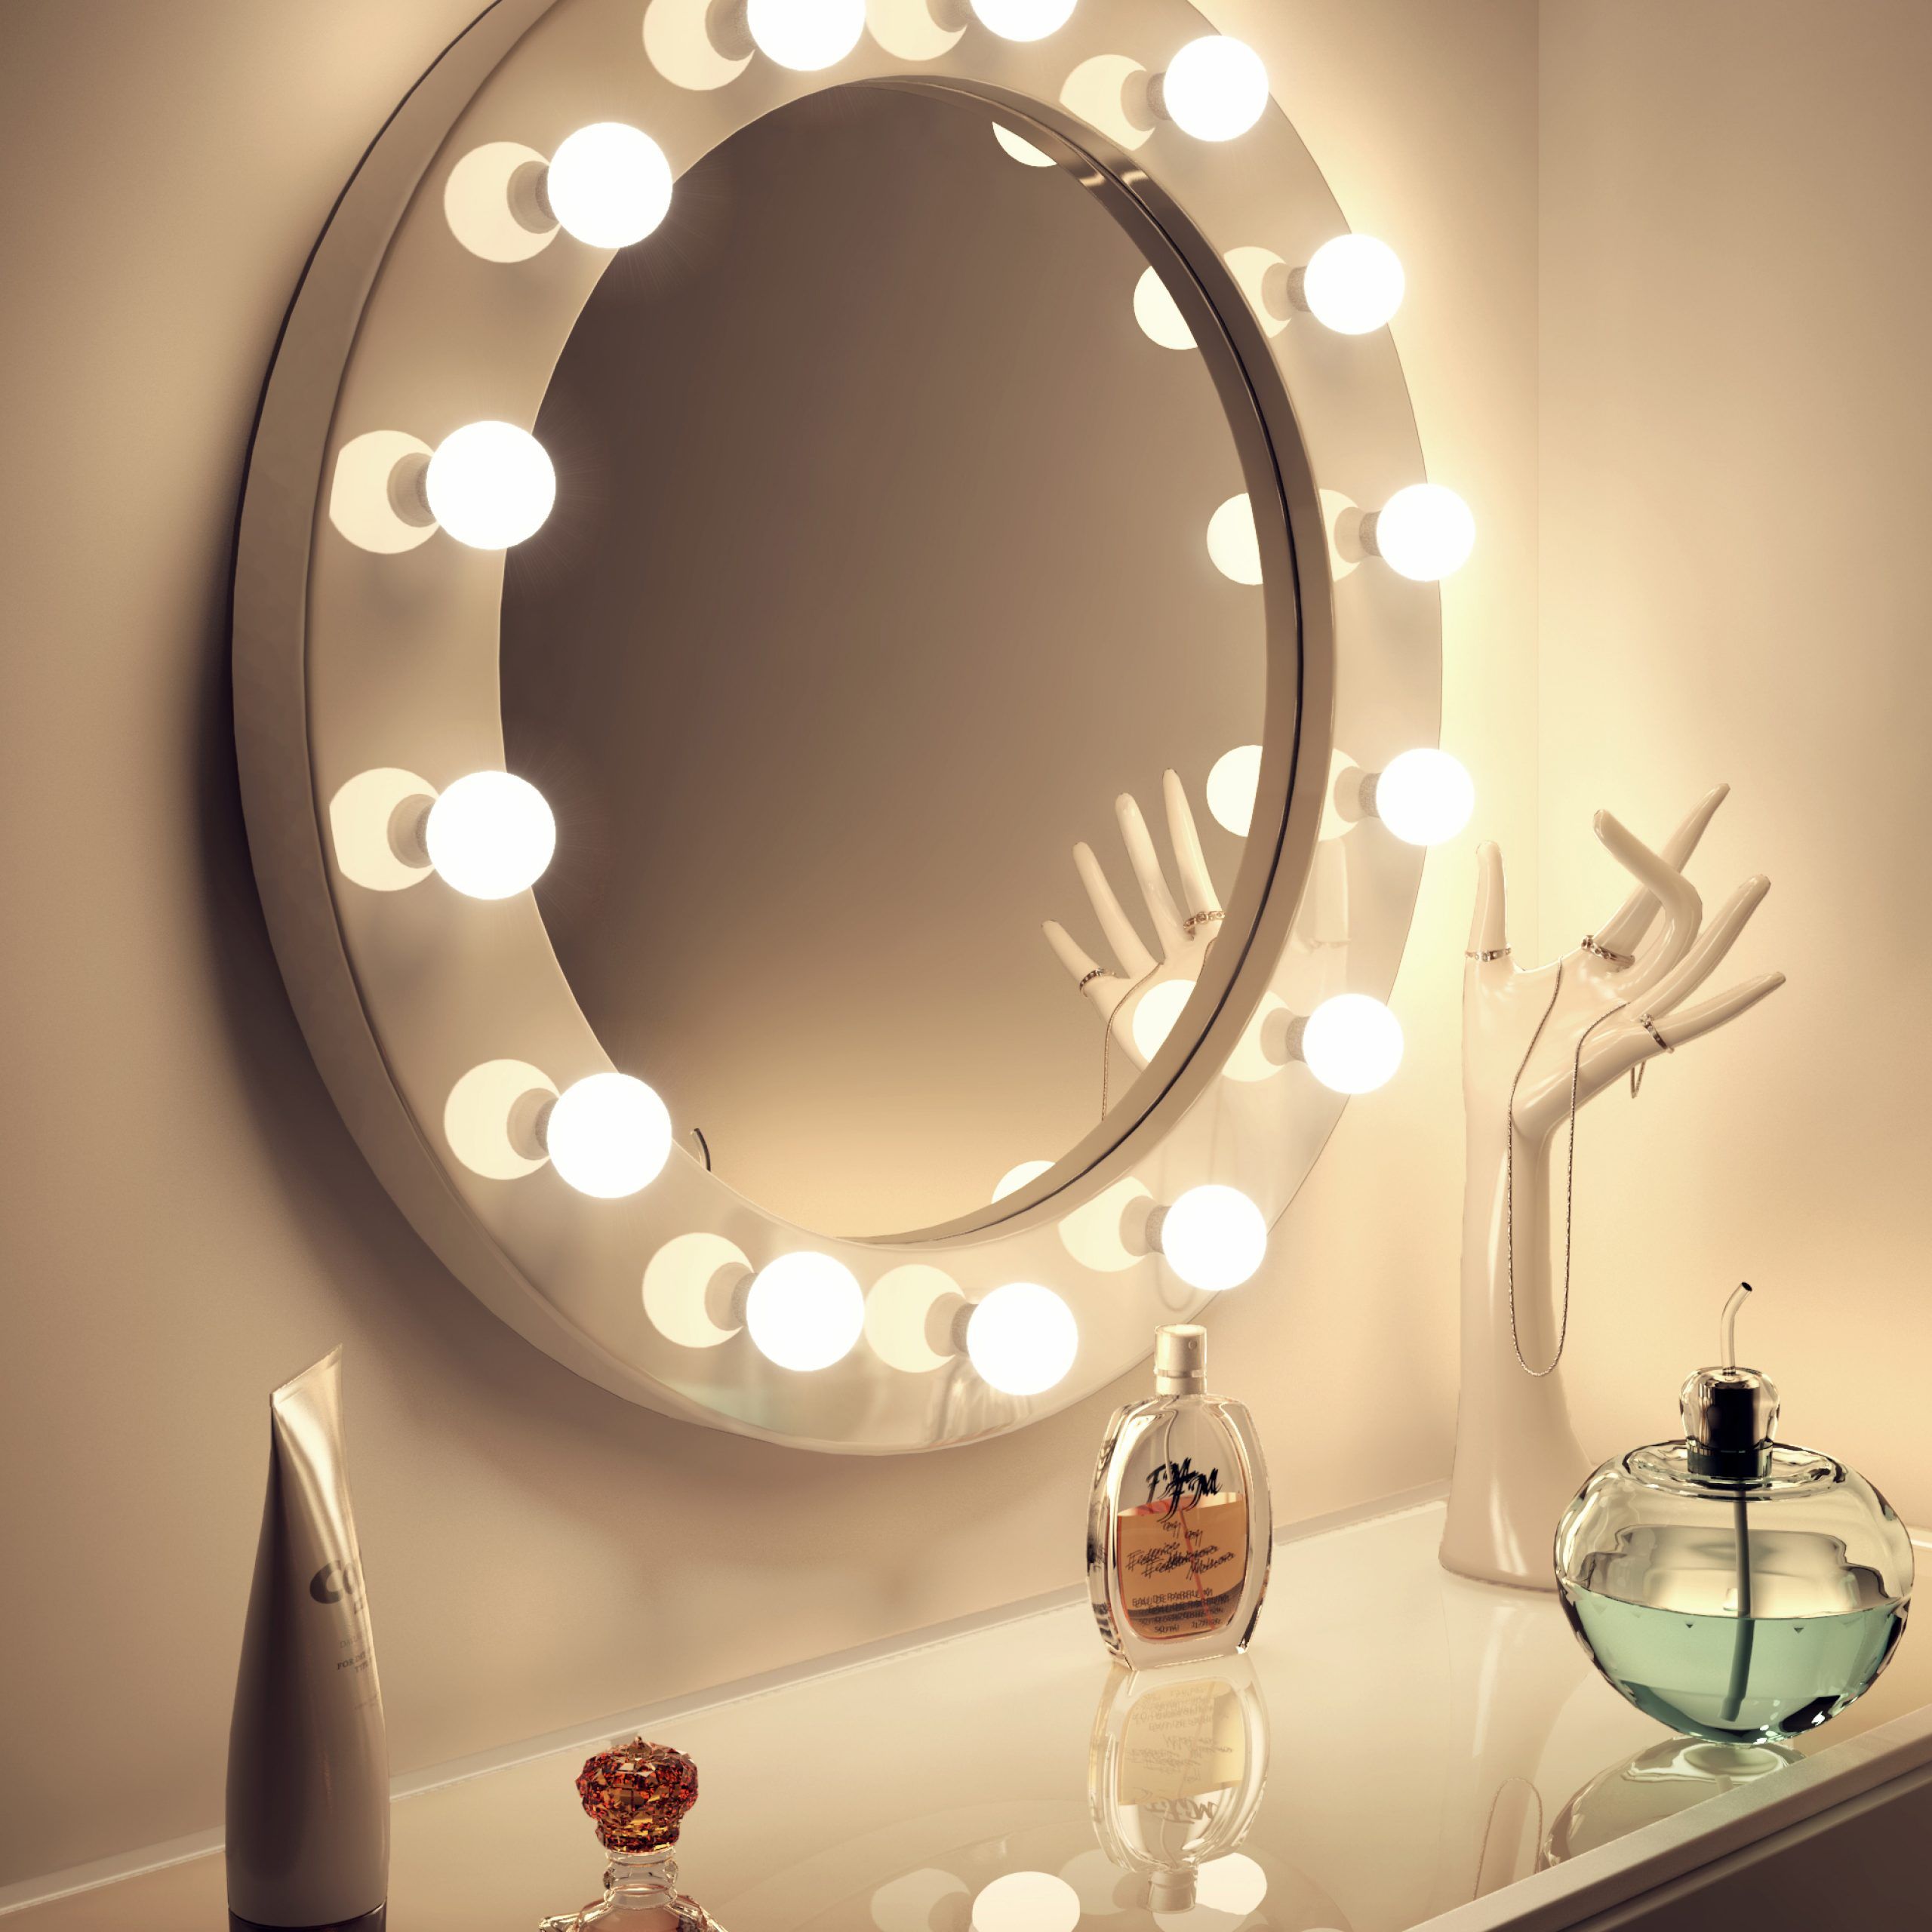 Illuminated Mirrors Wall Mounted High Gloss White V2 – Jwc For High Wall Mirrors (View 1 of 15)